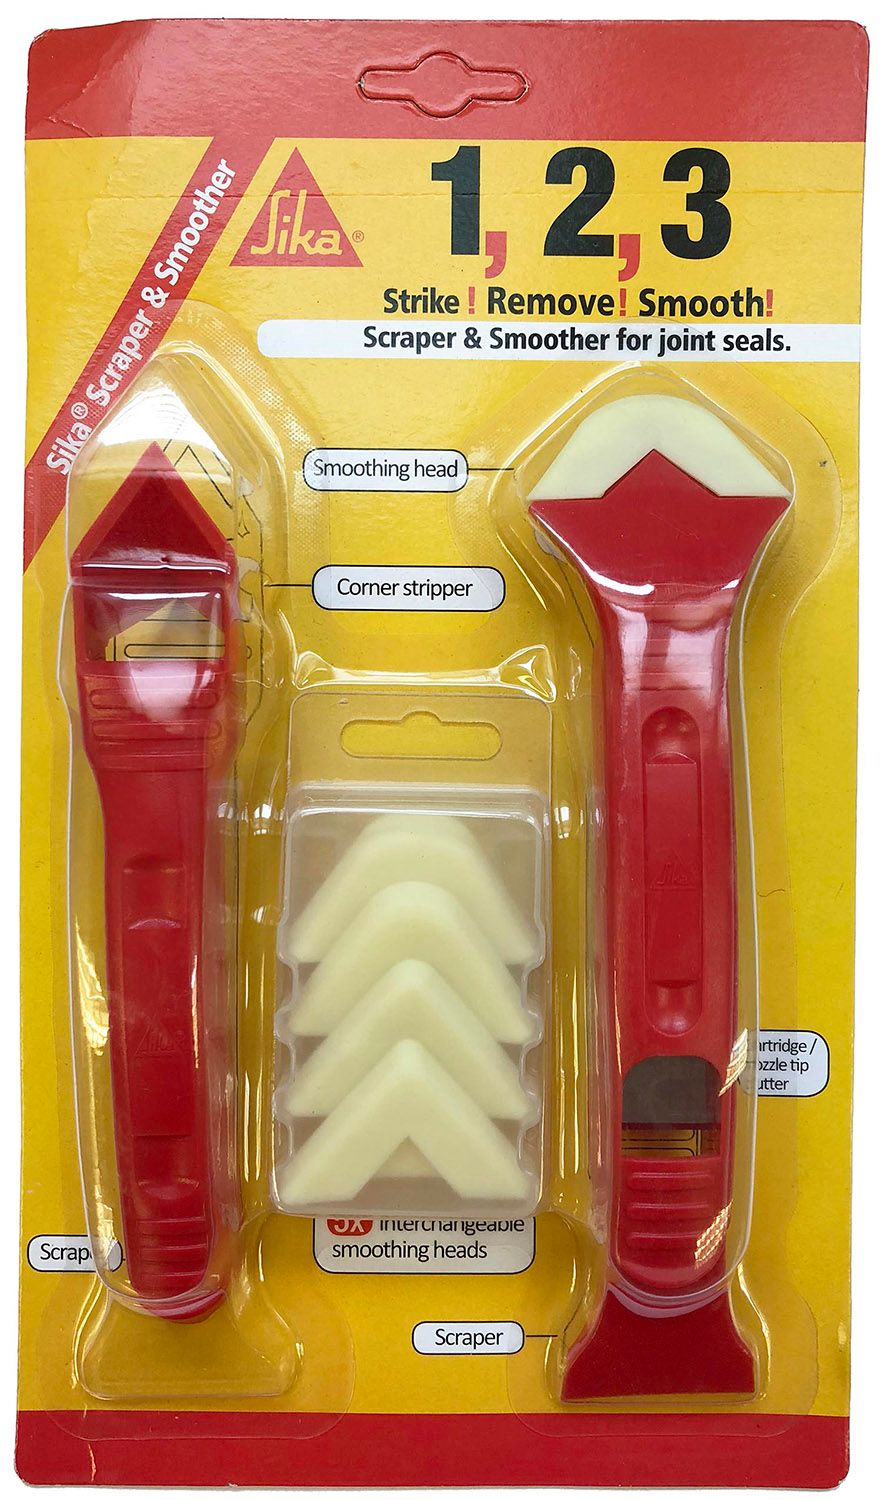 Sika Scraper & Smoother tool